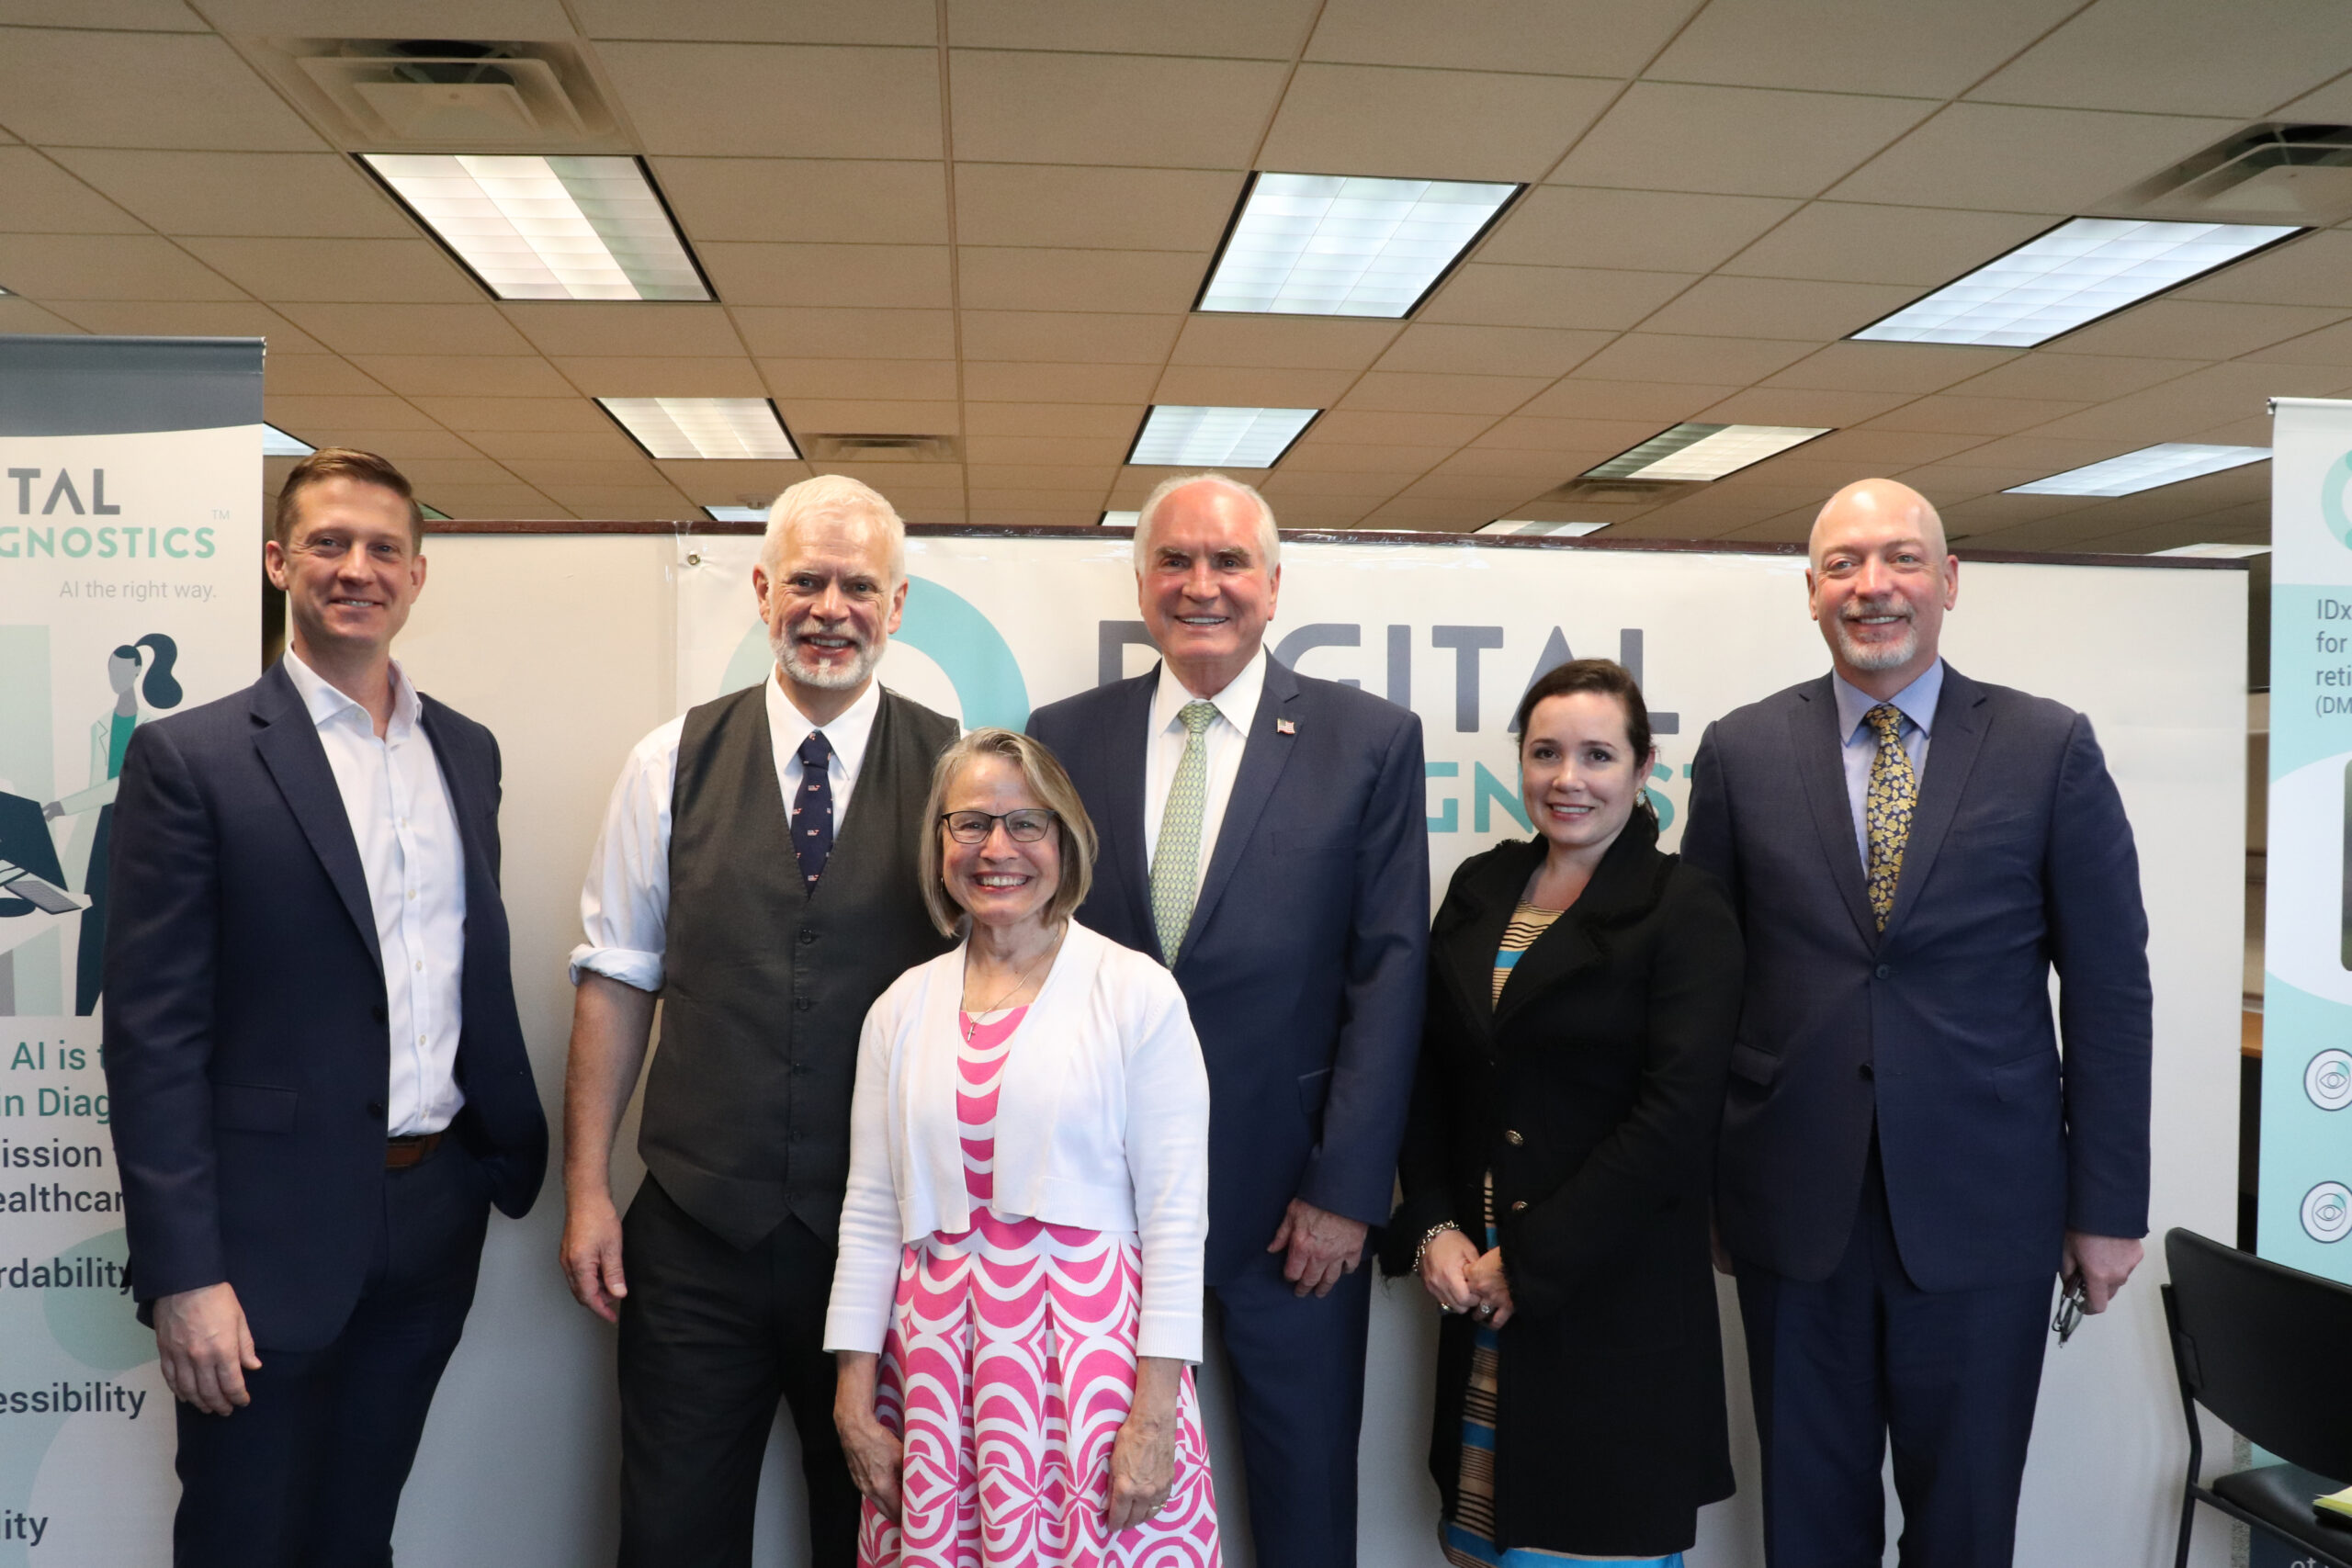 Digital Diagnostics hosted the Congressional Healthy Futures Task Force, Modernization Subcommittee